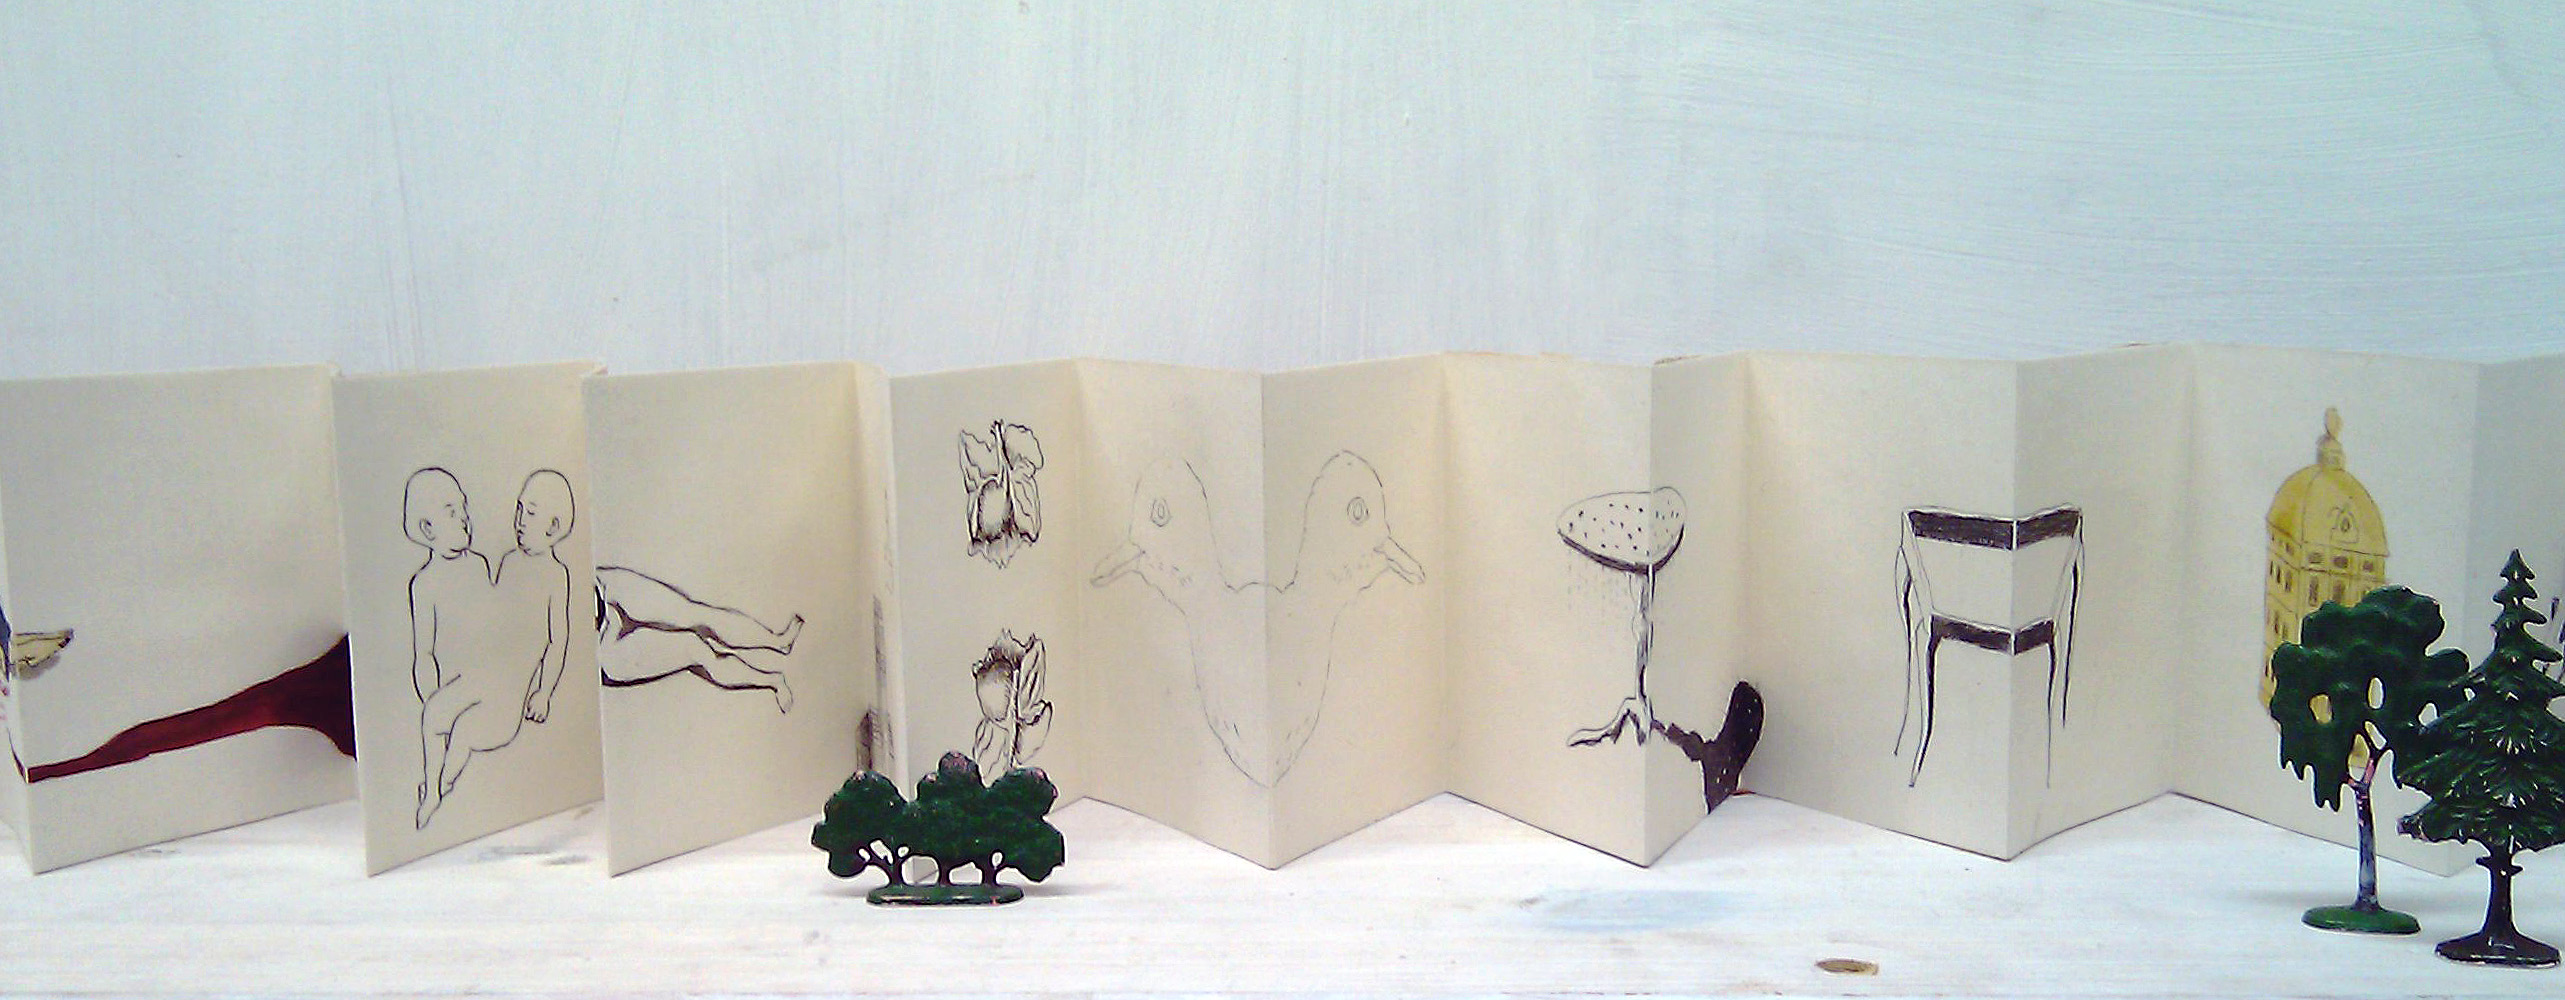 Artist Book, The middle of the book